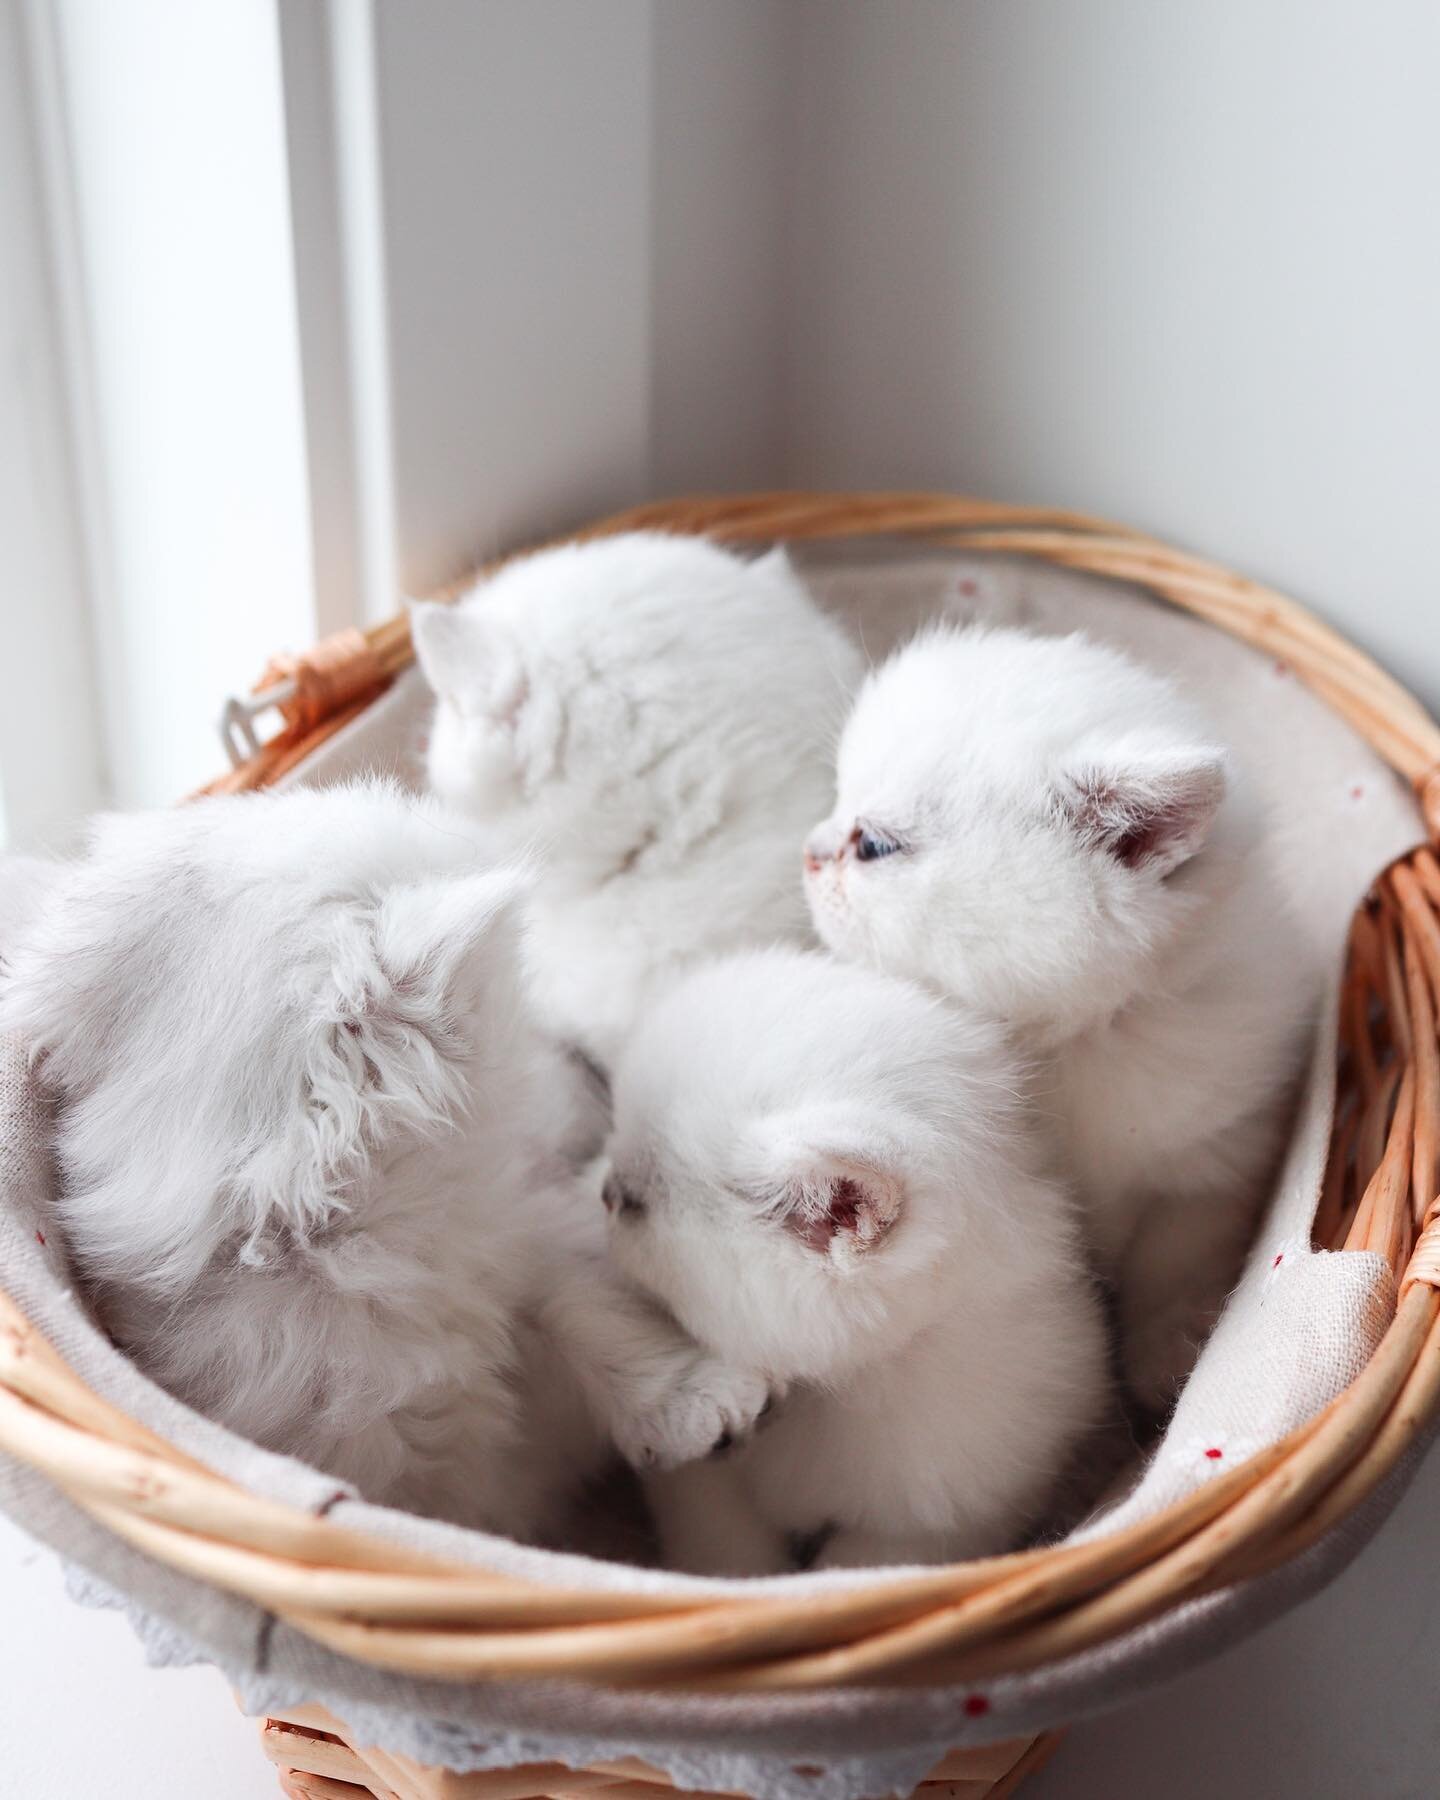 We have 3 British Shorthair and 1 British Longhair babies from this litter that are available for adoption 🐱 questionnaire will be open in 2 days!